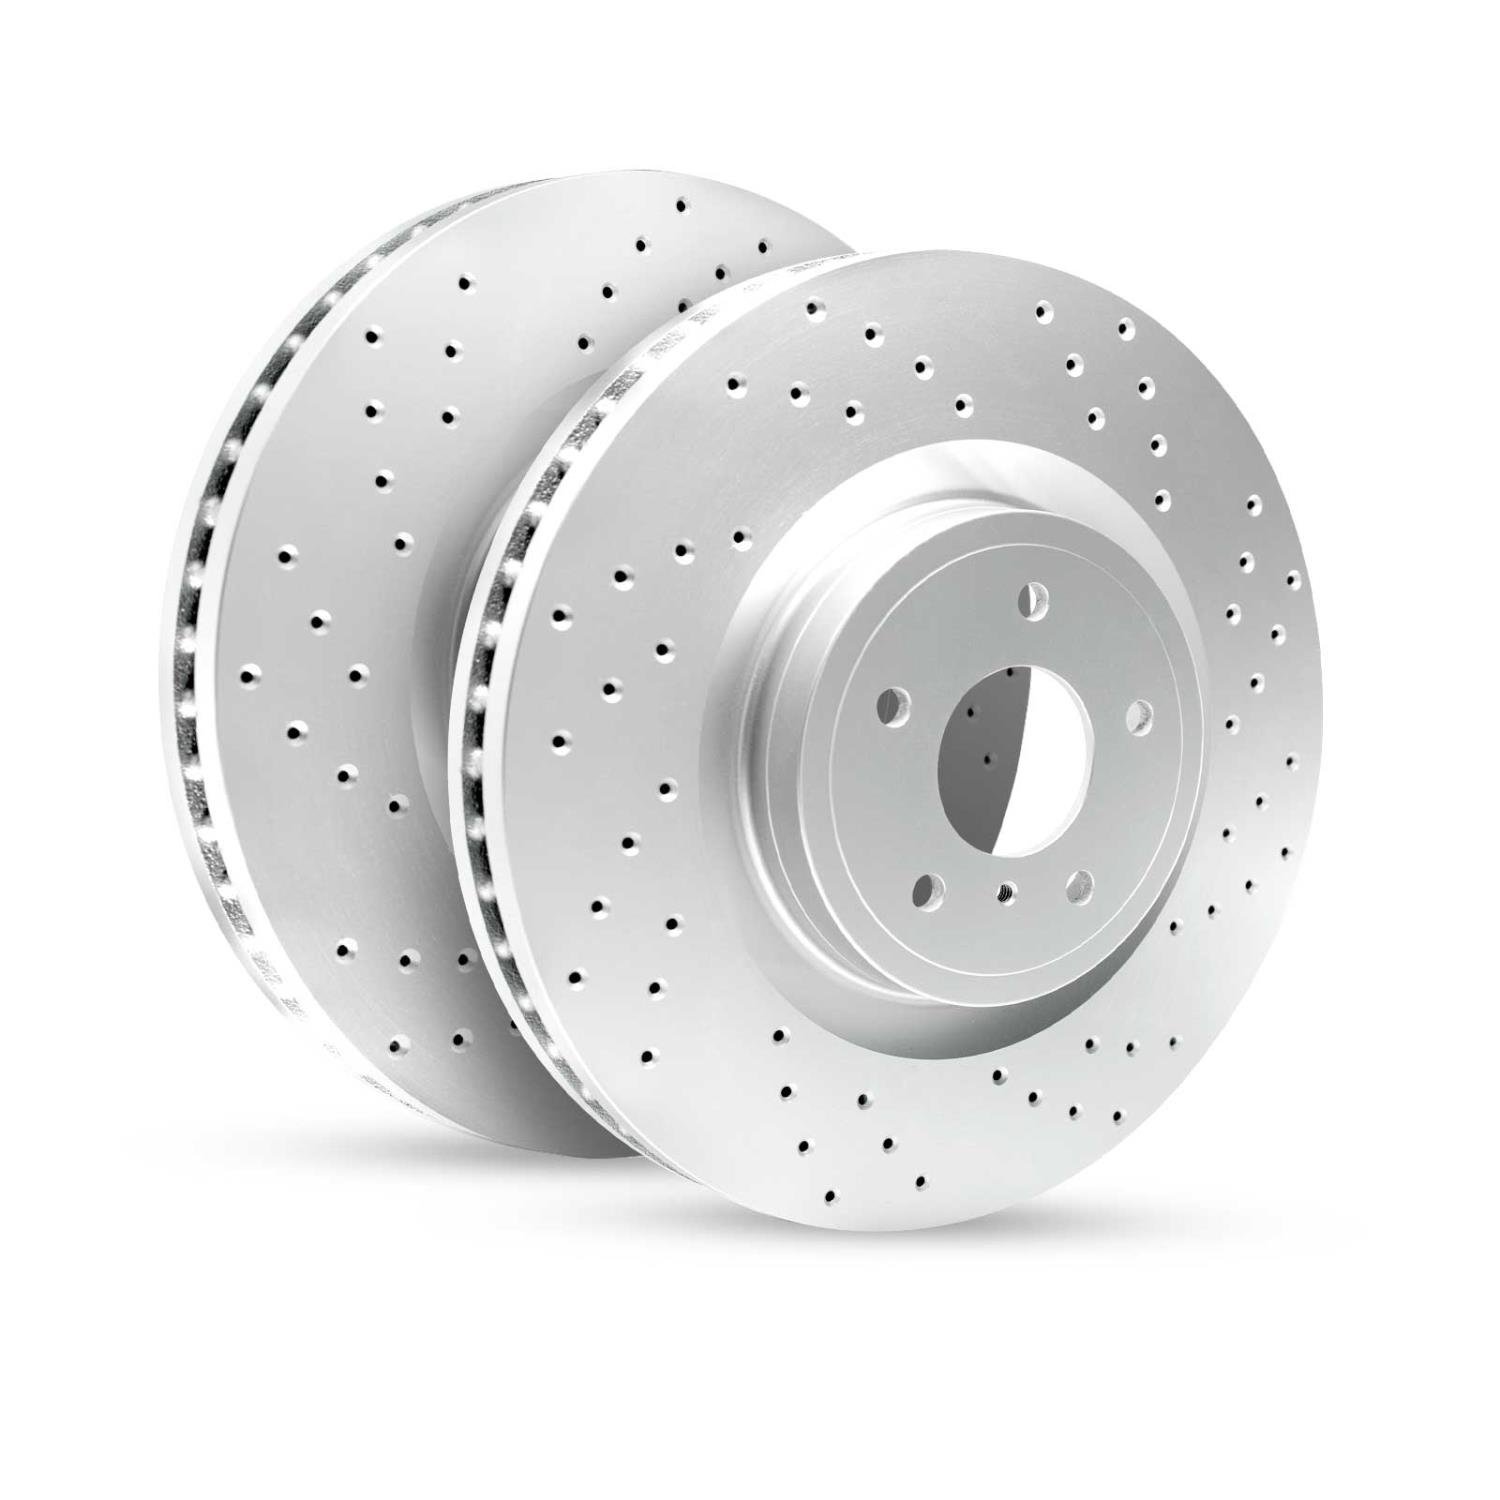 GEO-Carbon Drilled/Slotted Rotors, 2007-2018 Fits Multiple